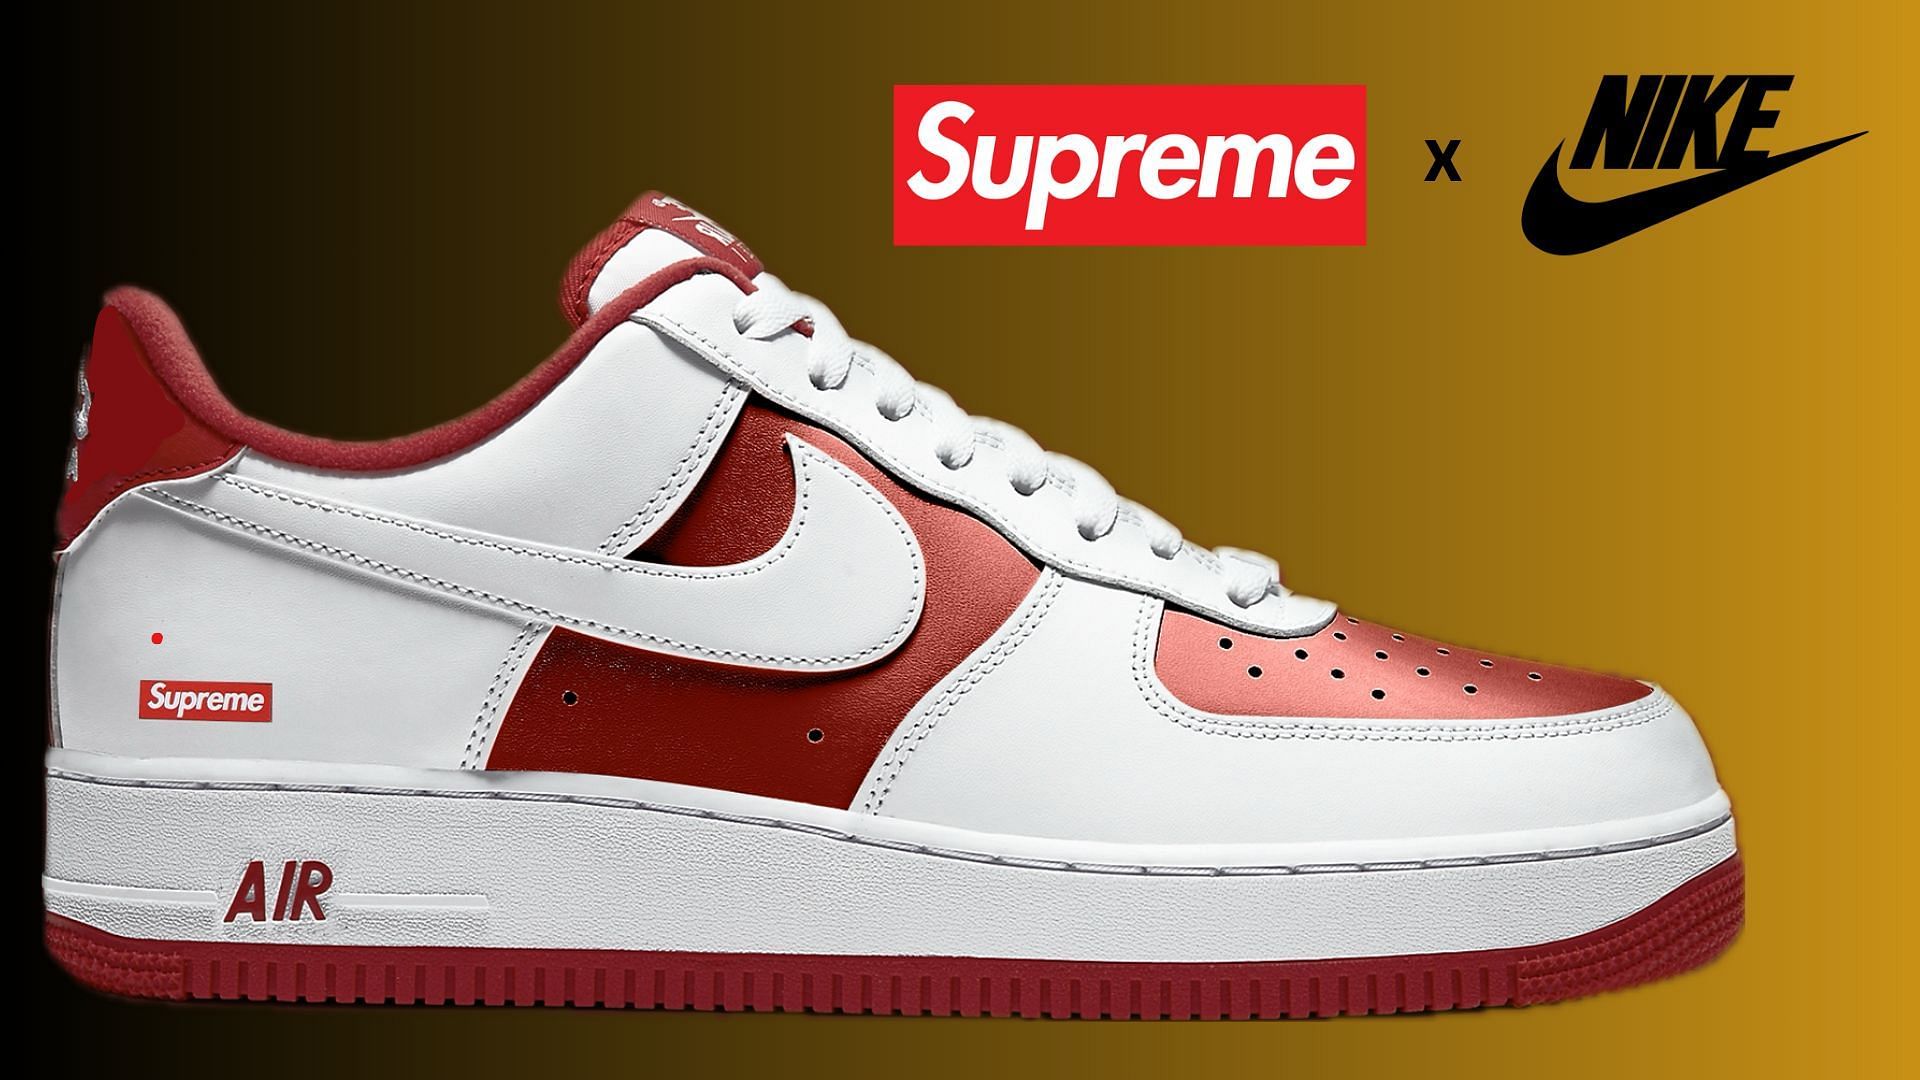 supreme: Supreme x Nike Air Force 1 Low “White Speed Red” sneakers 